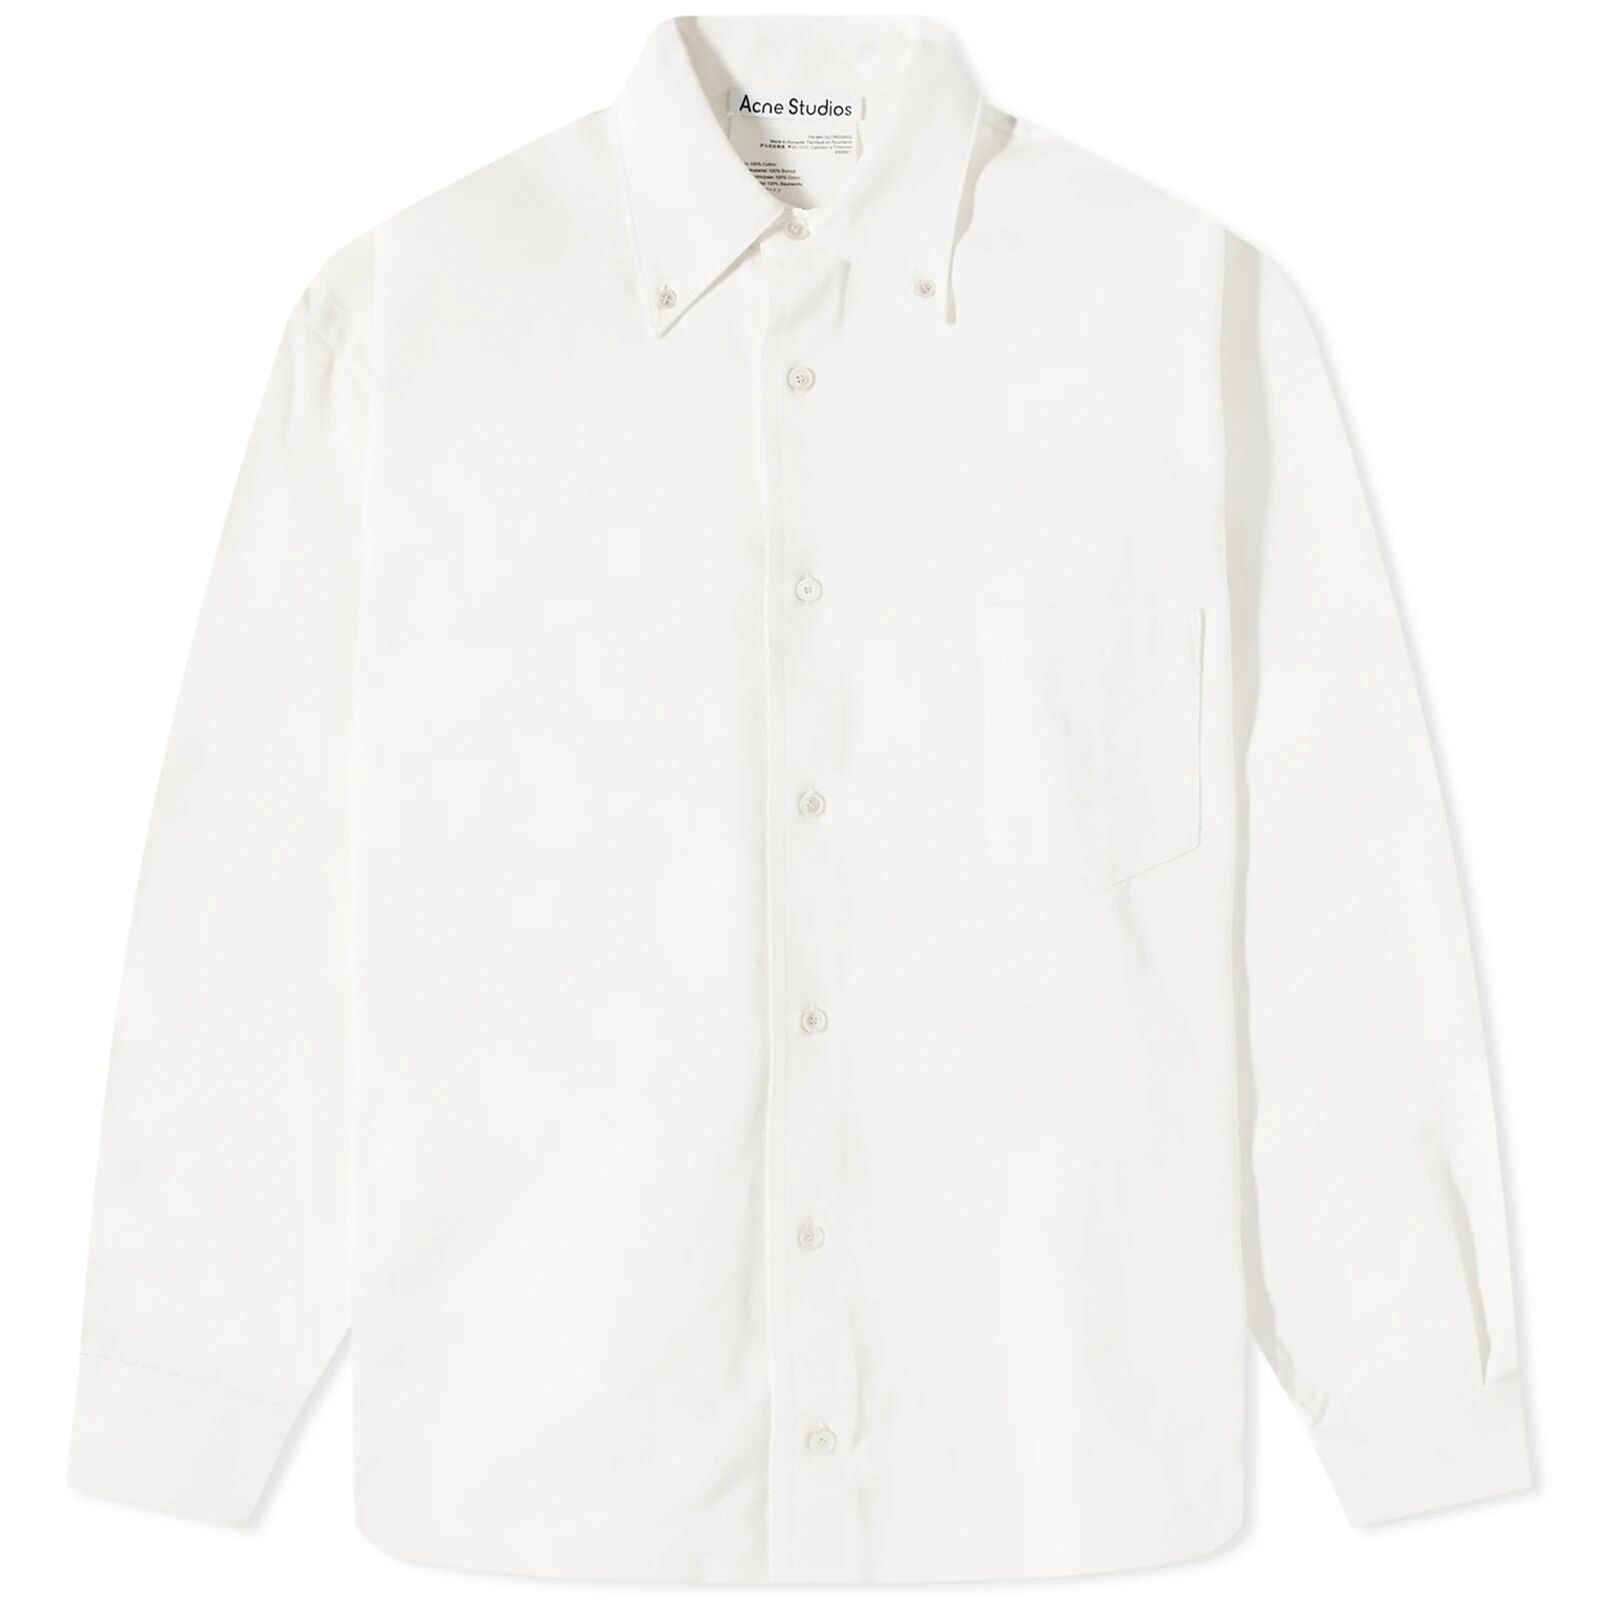 Acne Studios Men's Odrox Cotton Twill Overshirt in White, Size Large